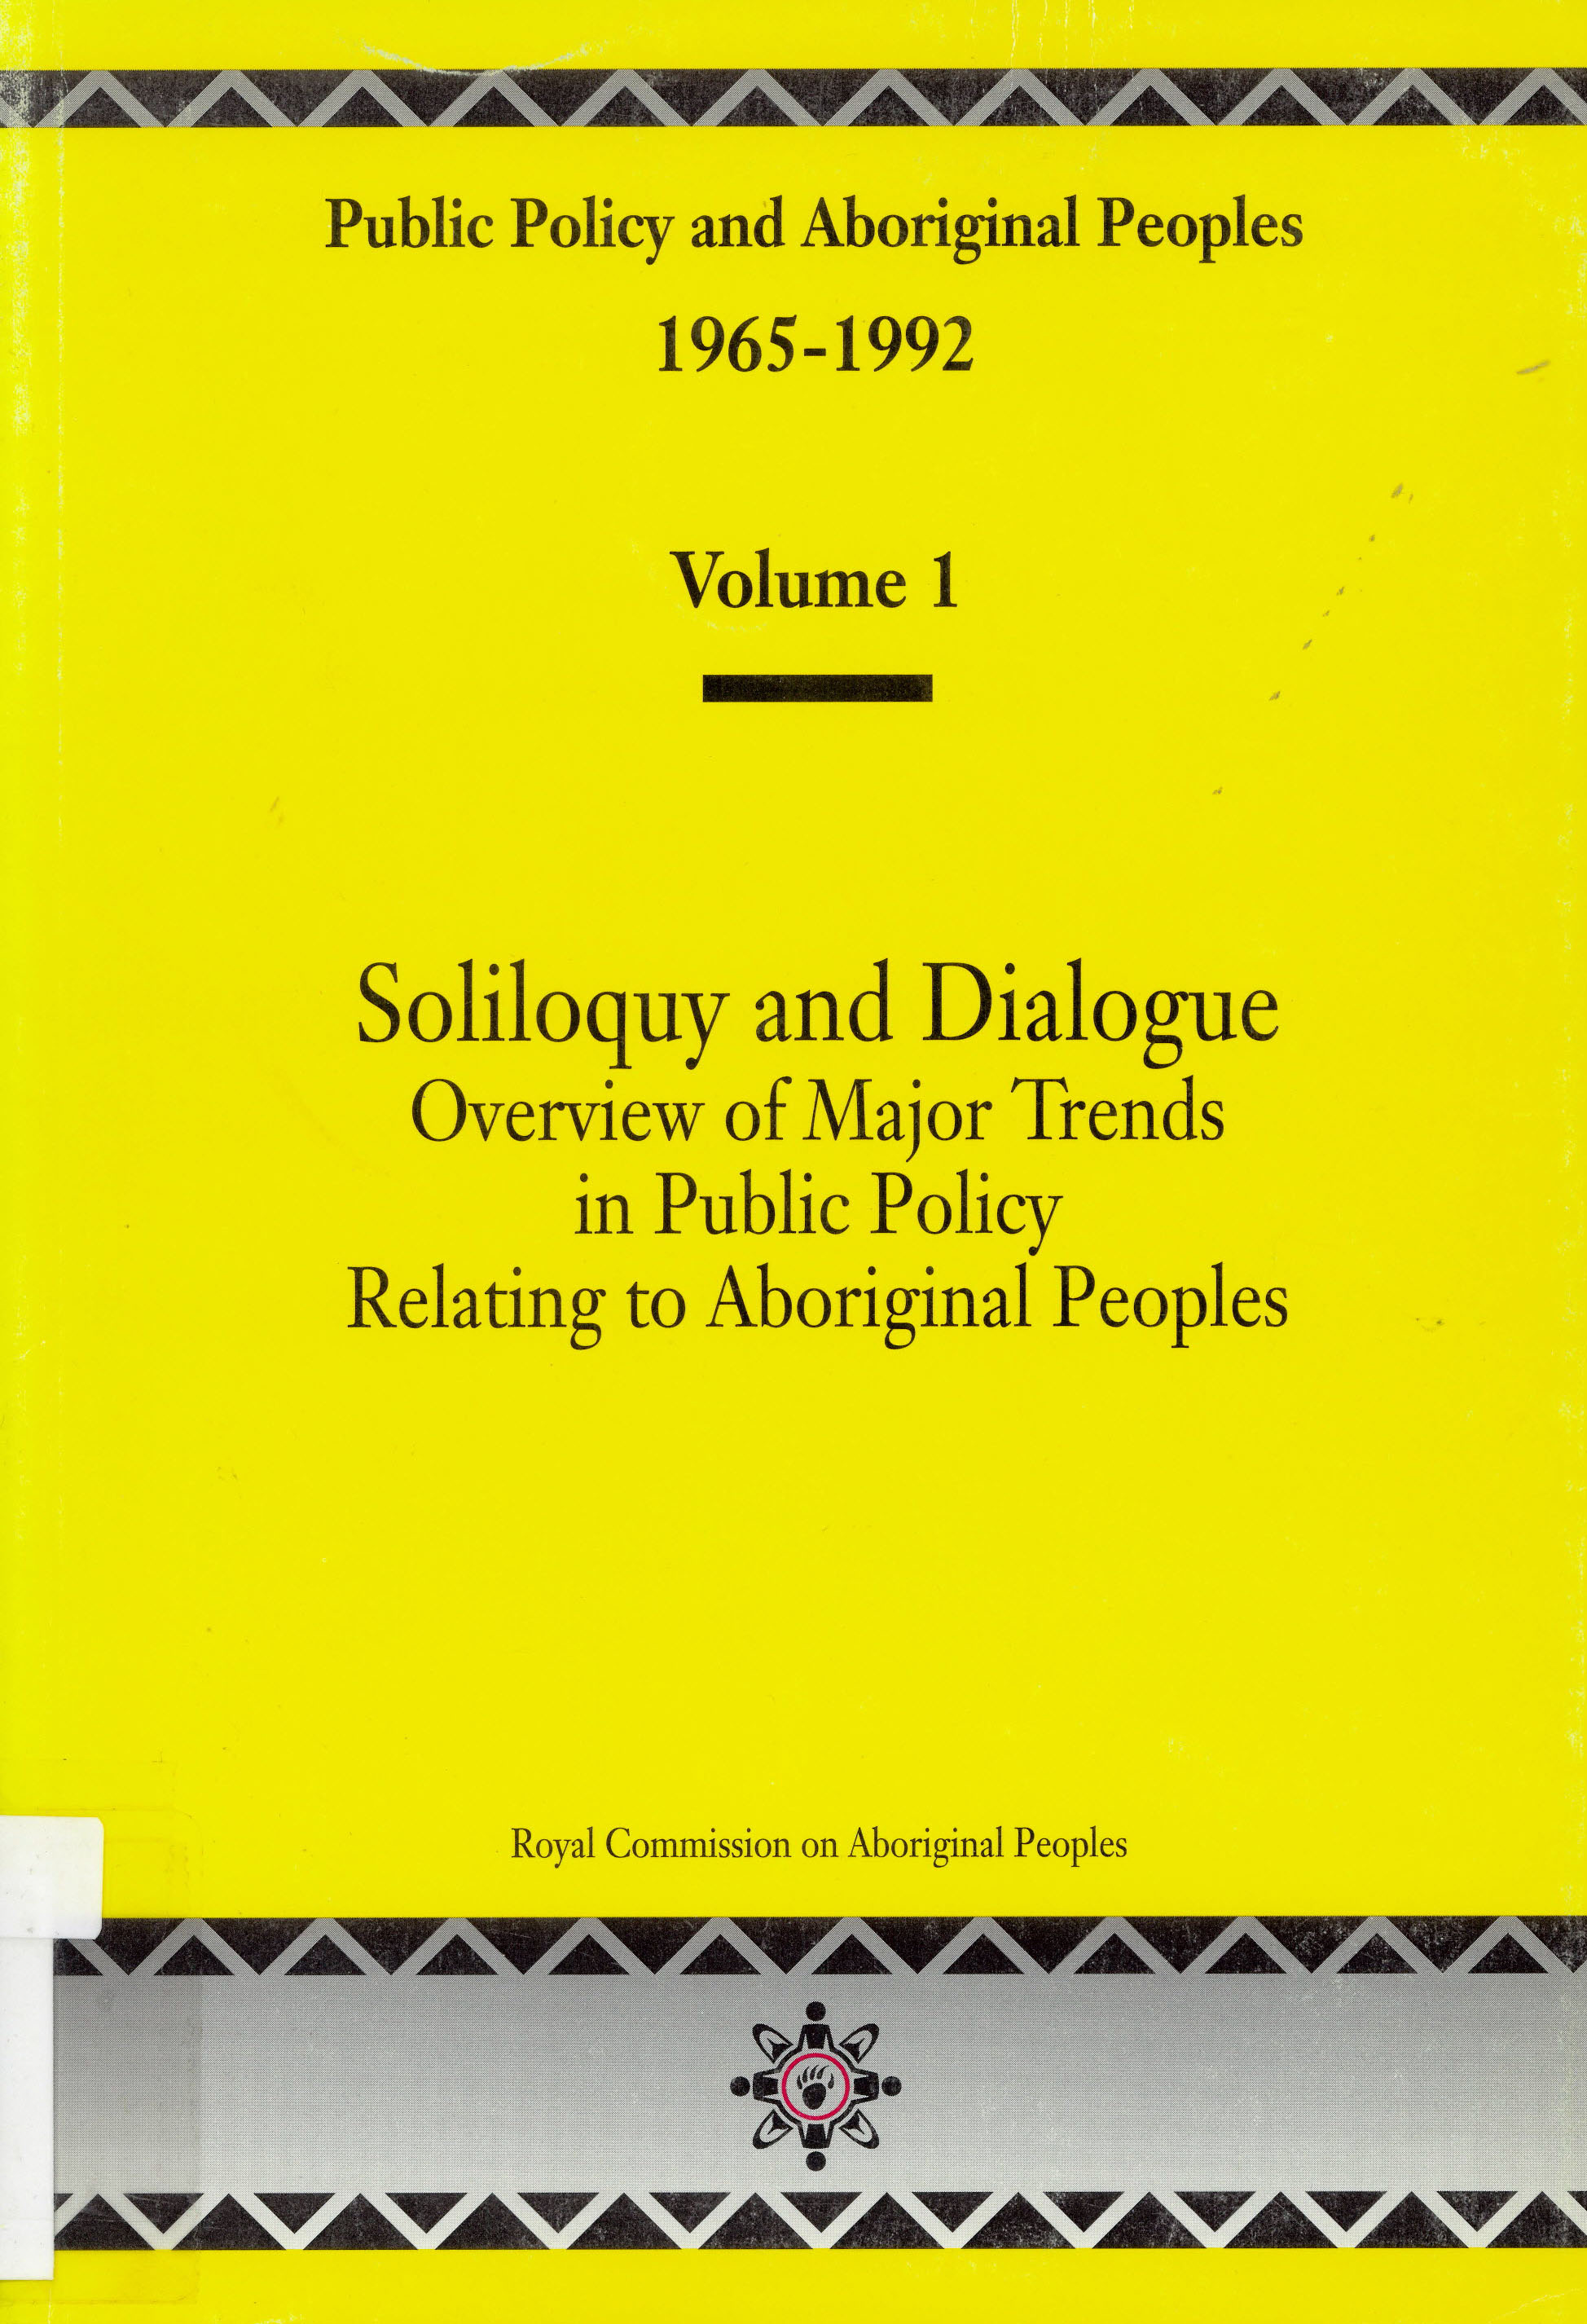 Public policy and aboriginal peoples, 1965-1992 : Volume 1, soliloquy and dialogue : overview of major trends in public policy relating to aboriginal peoples